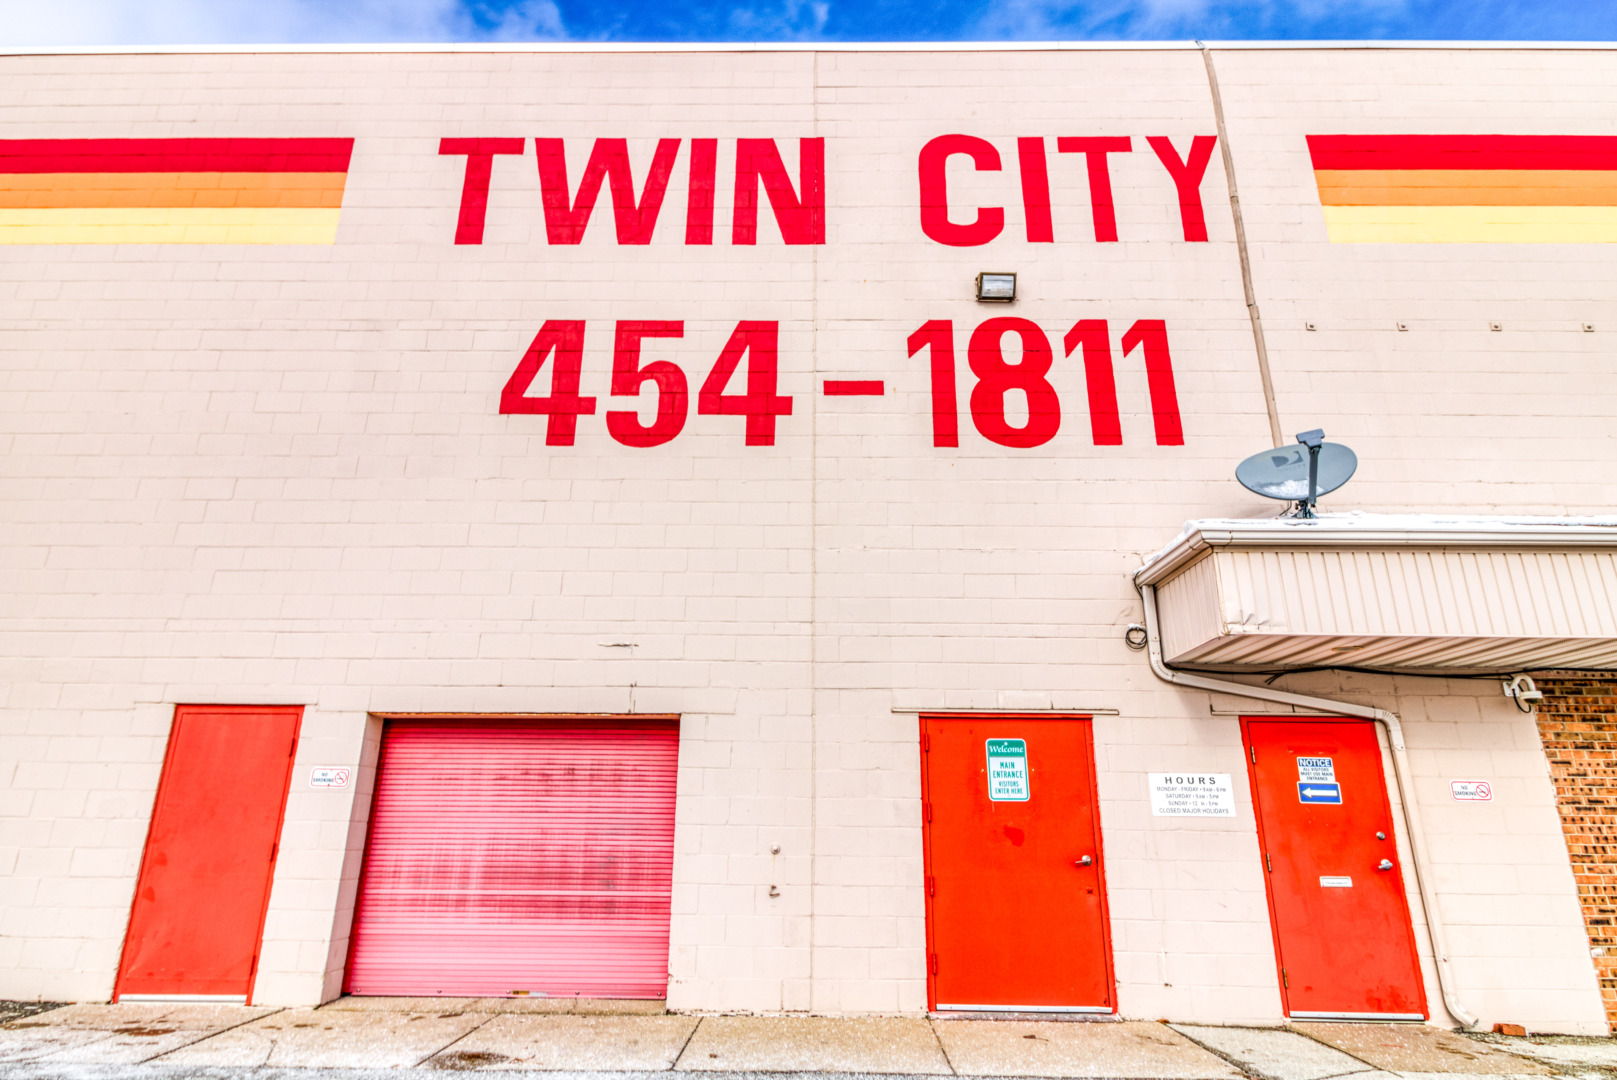 The exterior of Twin City Self Storage facility.